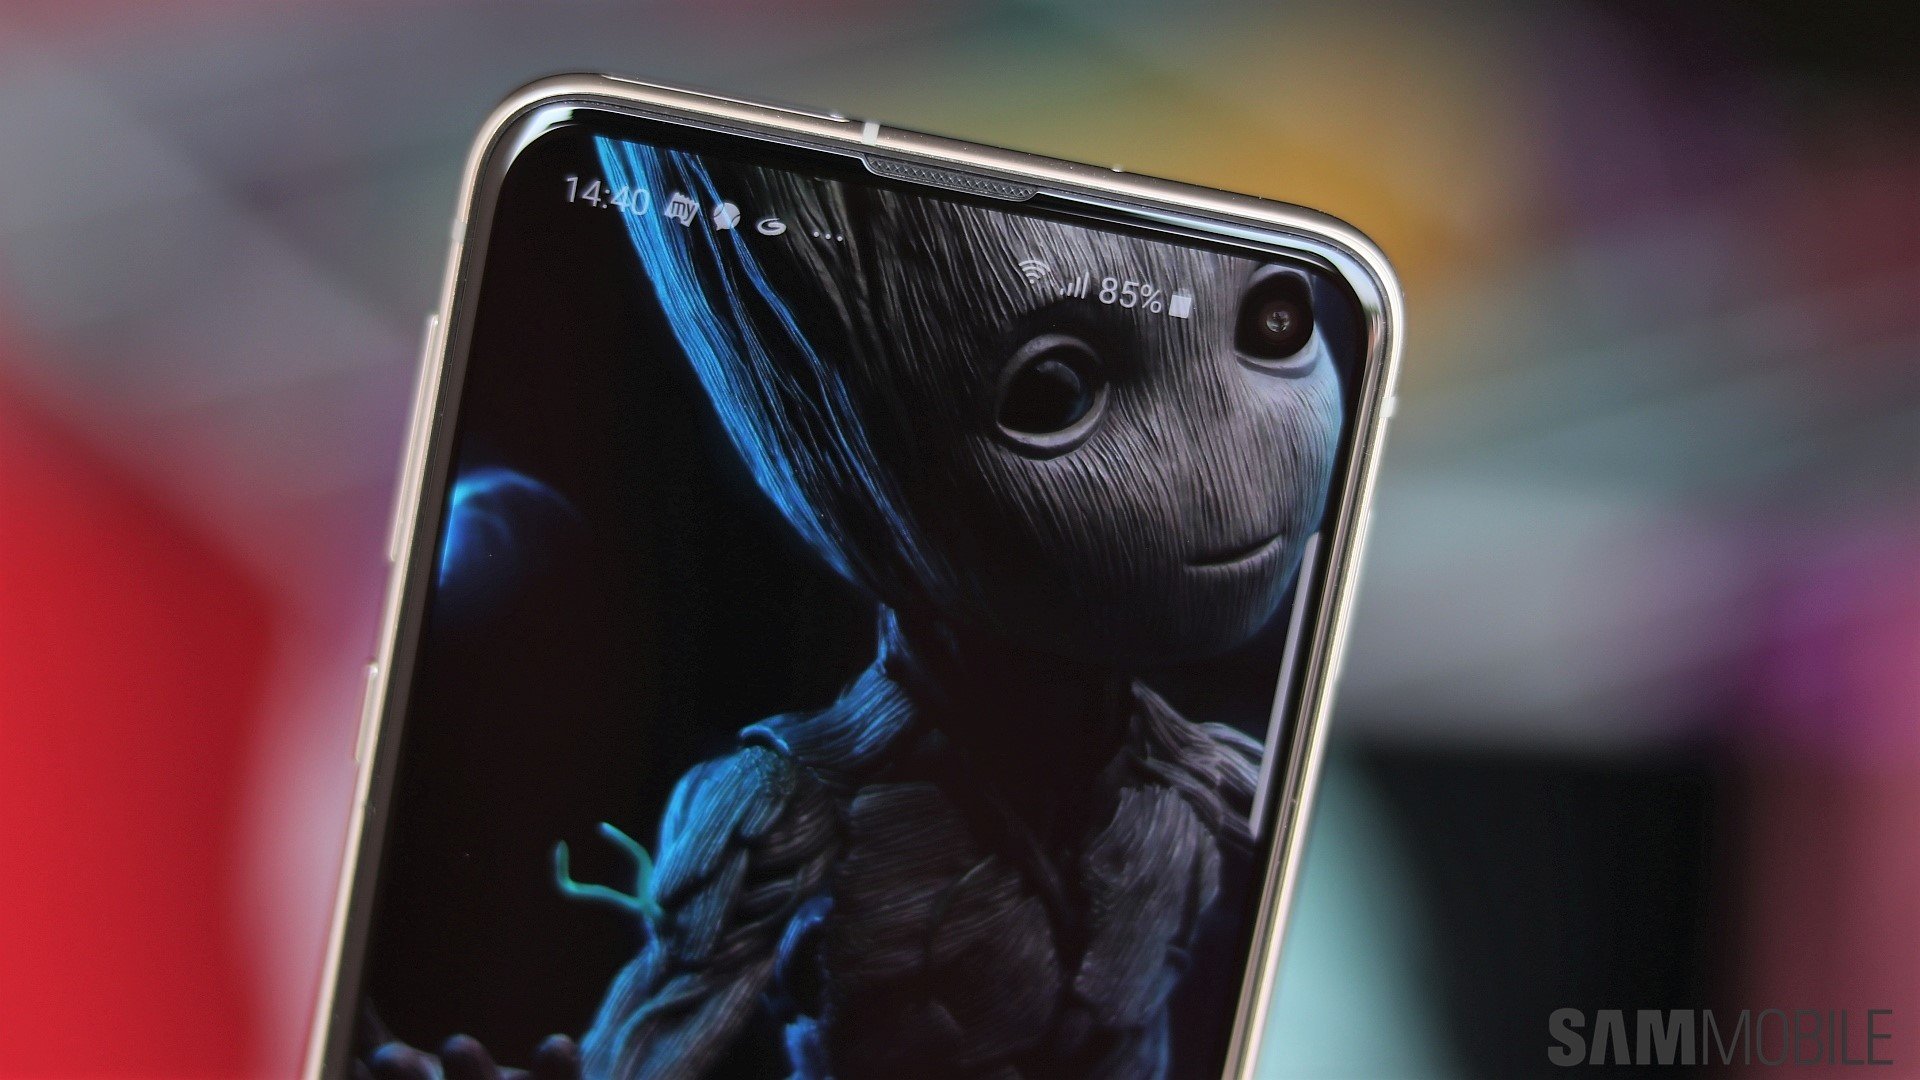 This App Is All You Need For Free Galaxy S10 Cutout Wallpapers Sammobile